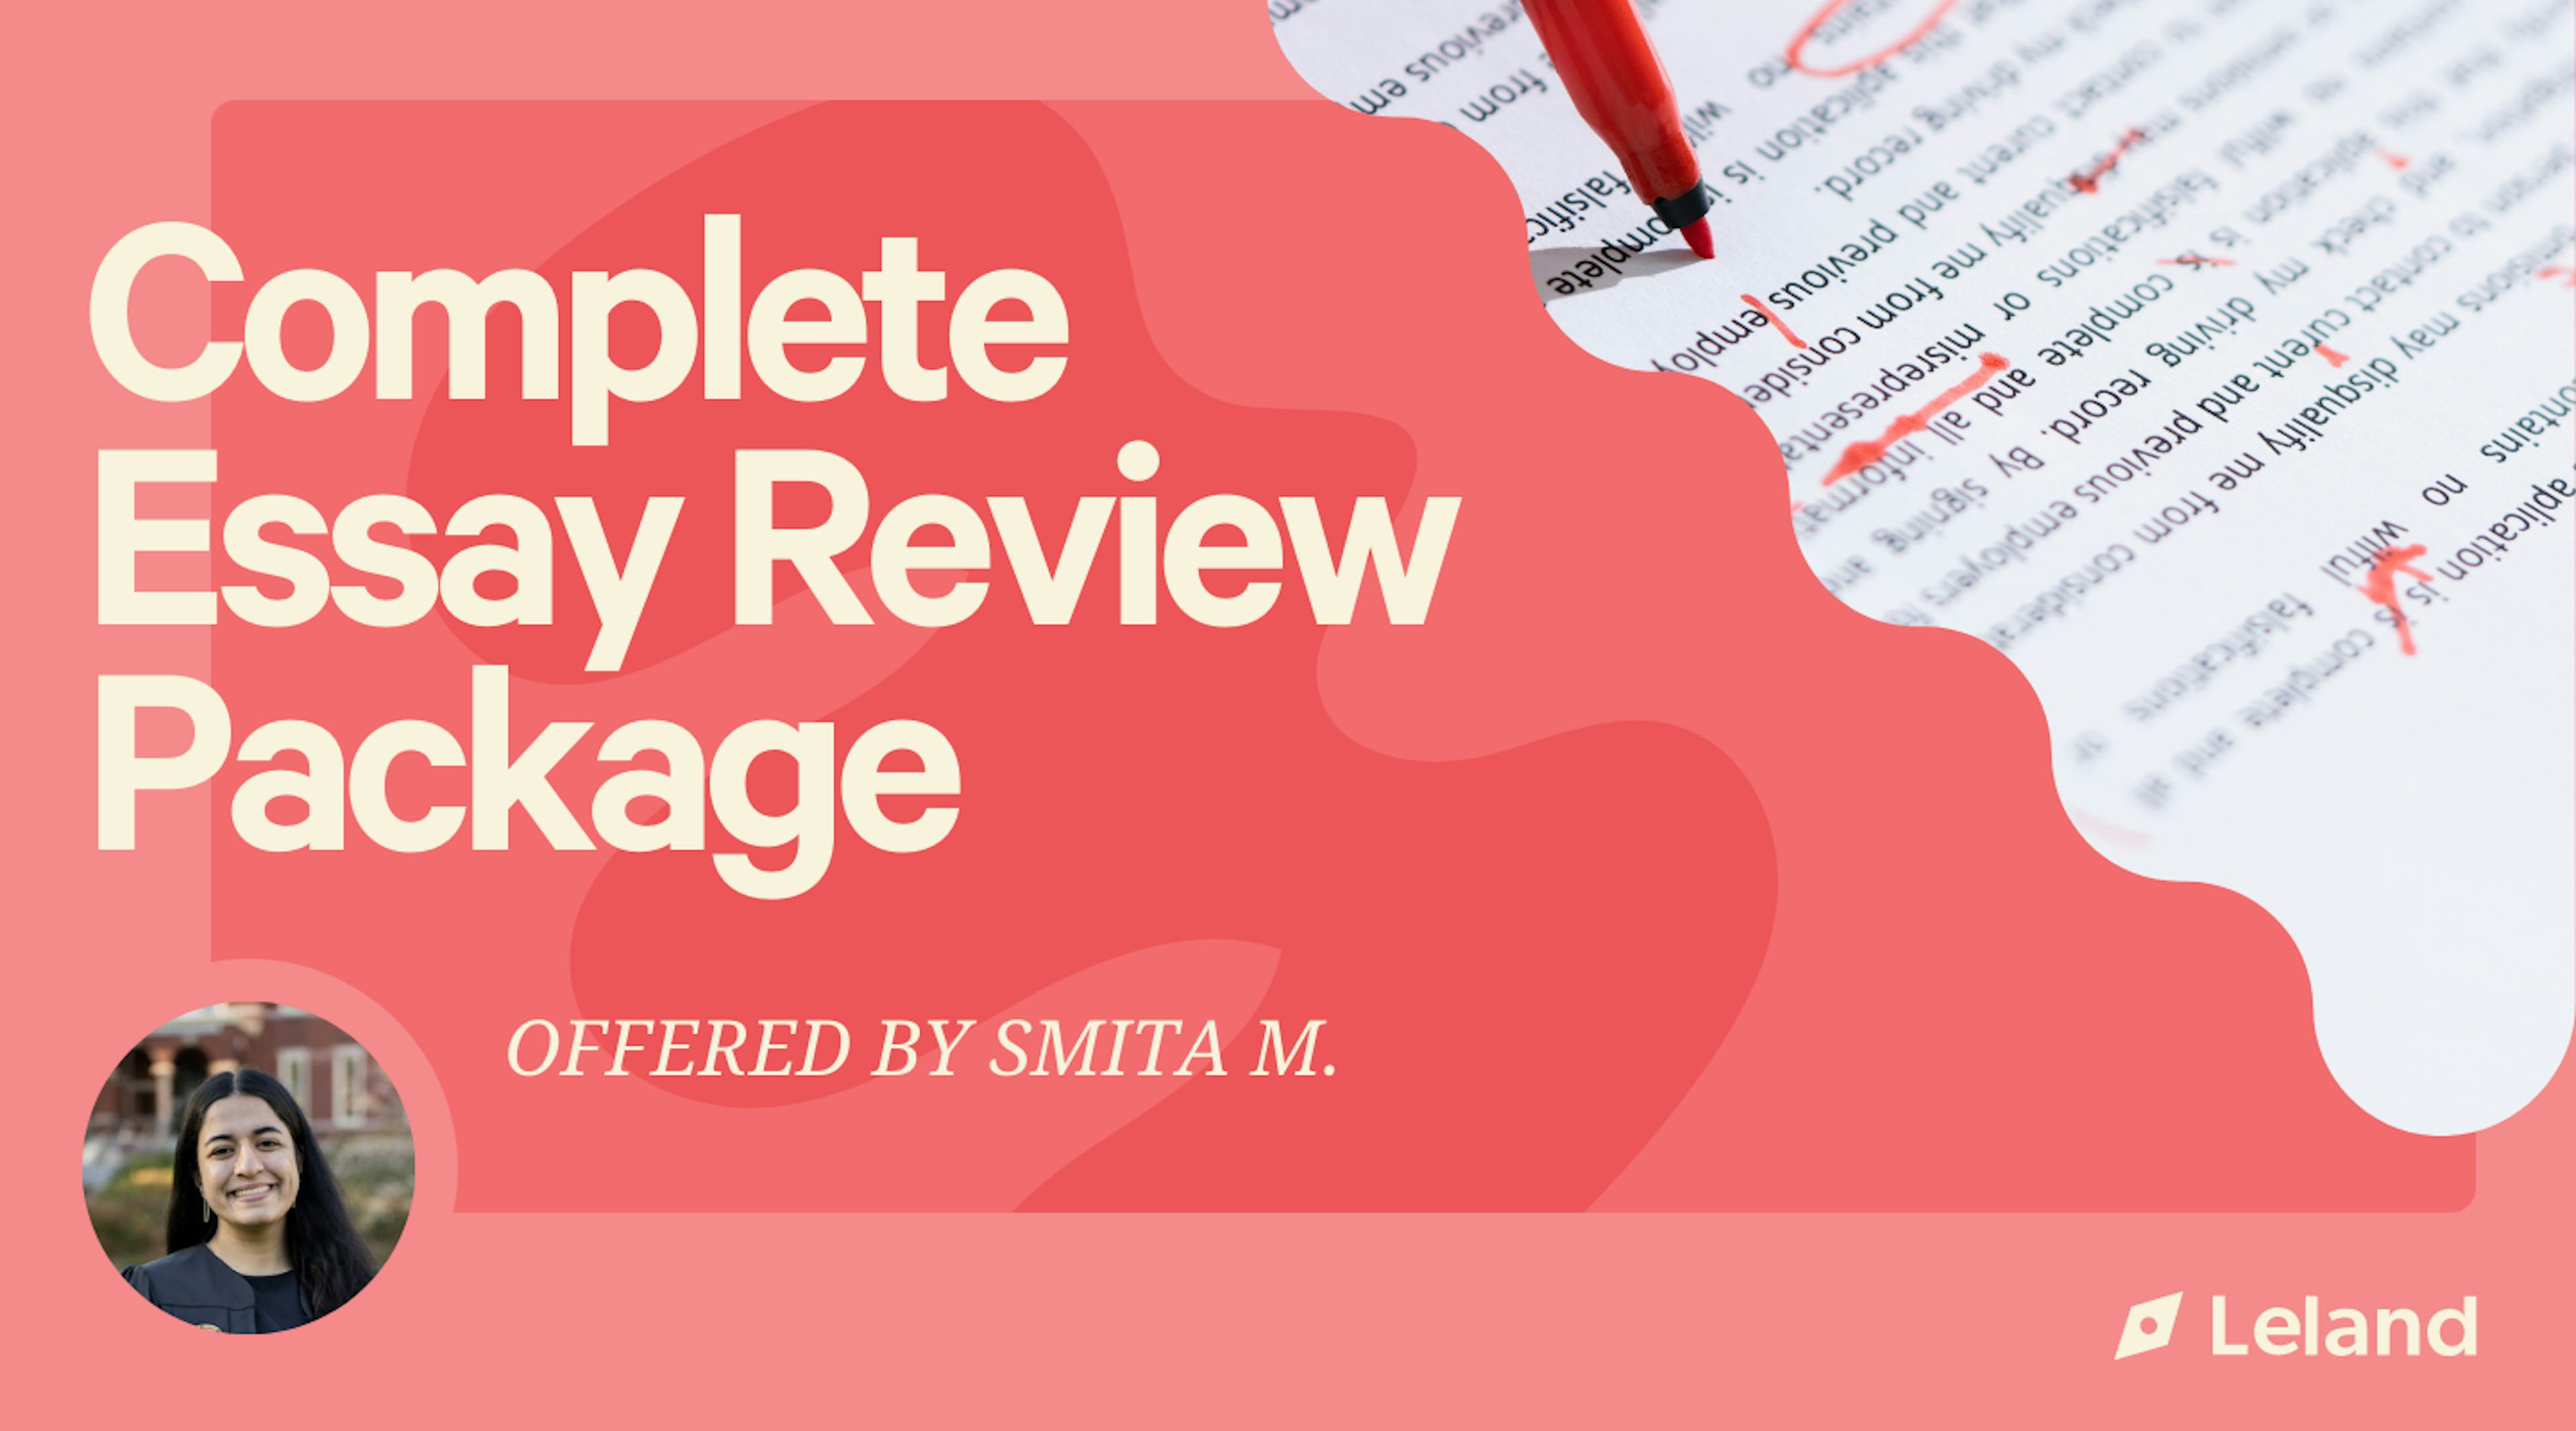 Complete Essay Review Package